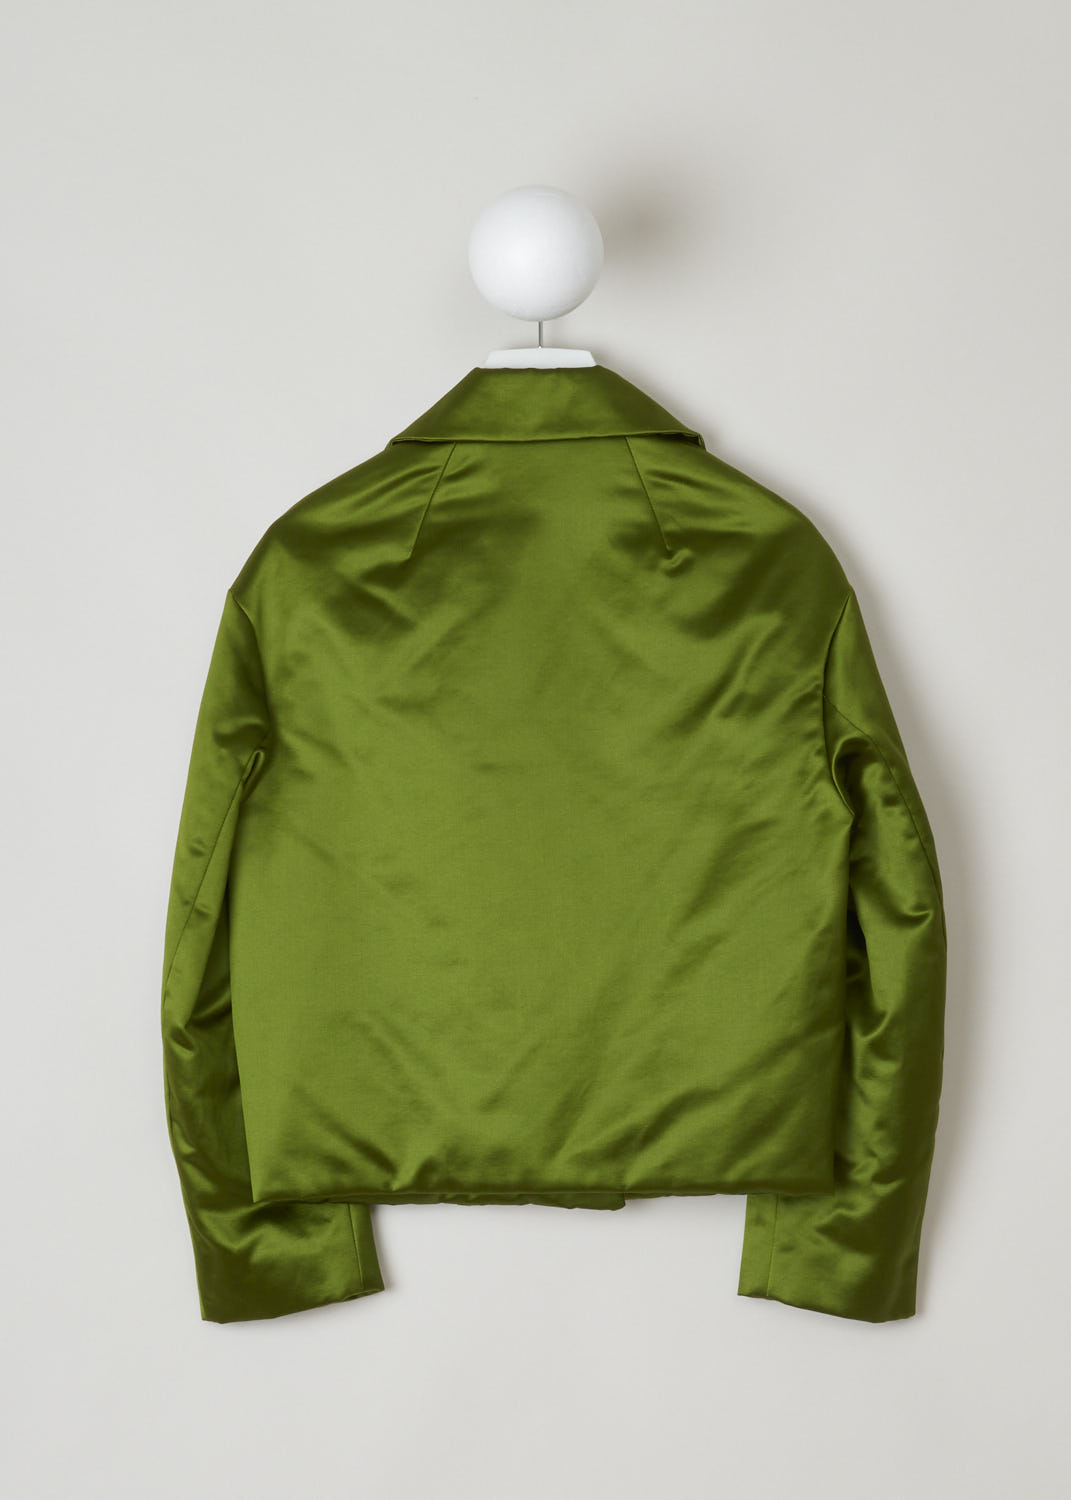 DRIES VAN NOTEN, METALLIC GREEN CROPPED JACKET, VONDI_3356_WW_JACKET_GRE, Green, Back, This silky smooth cropped jacket has a notched lapel. The jacket does not have a closing function, meaning the jacket is open in the front. Two welt pockets with a flap can be found on the front of the jacket. 